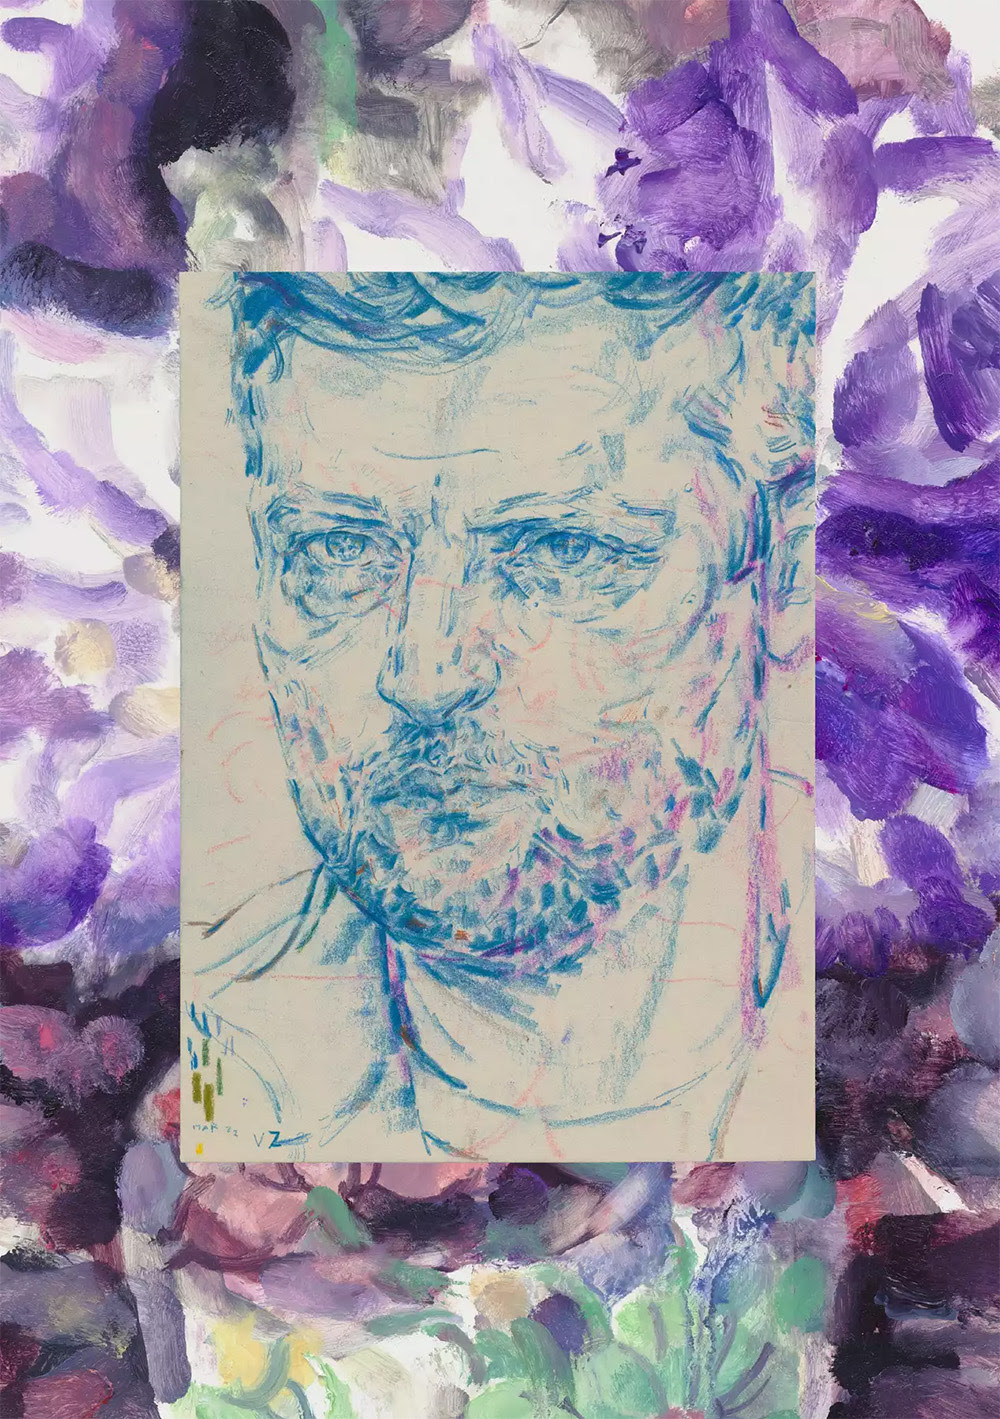 Contour portrait of Ukrainian President Volodymyr Zelenskyy in oil painting with a border of water-color flowers